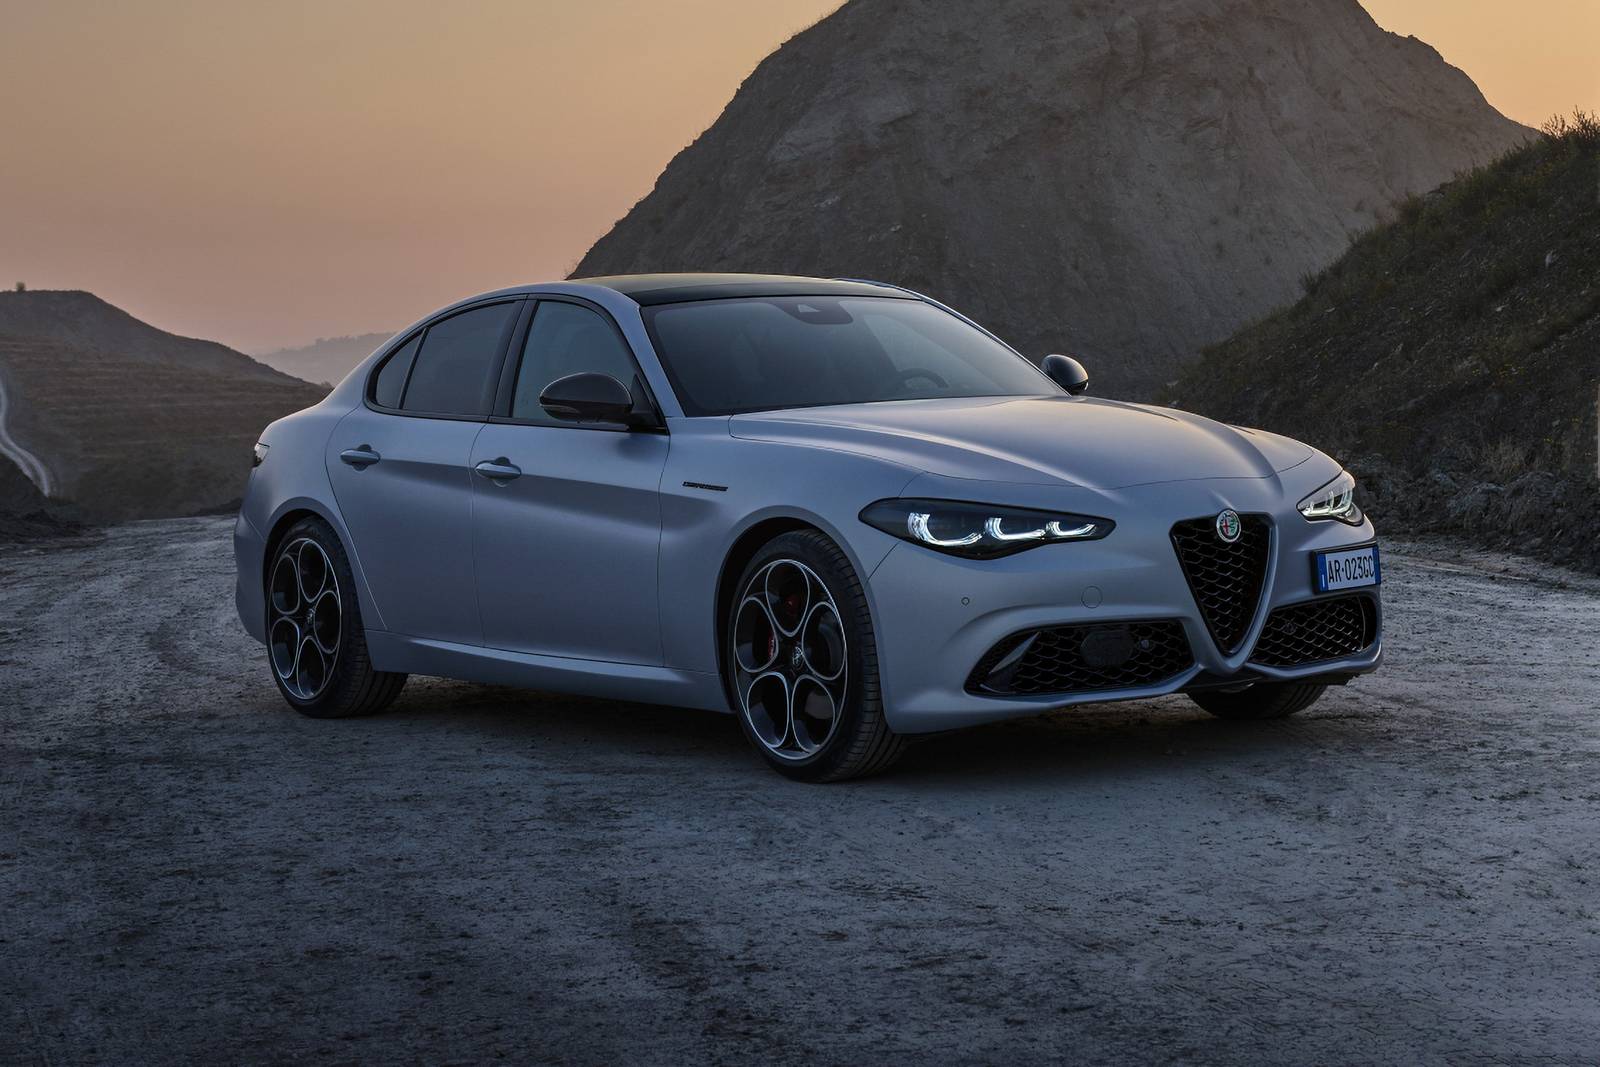 Alfa Romeo Cars and SUVs: Reviews, Pricing, and Specs